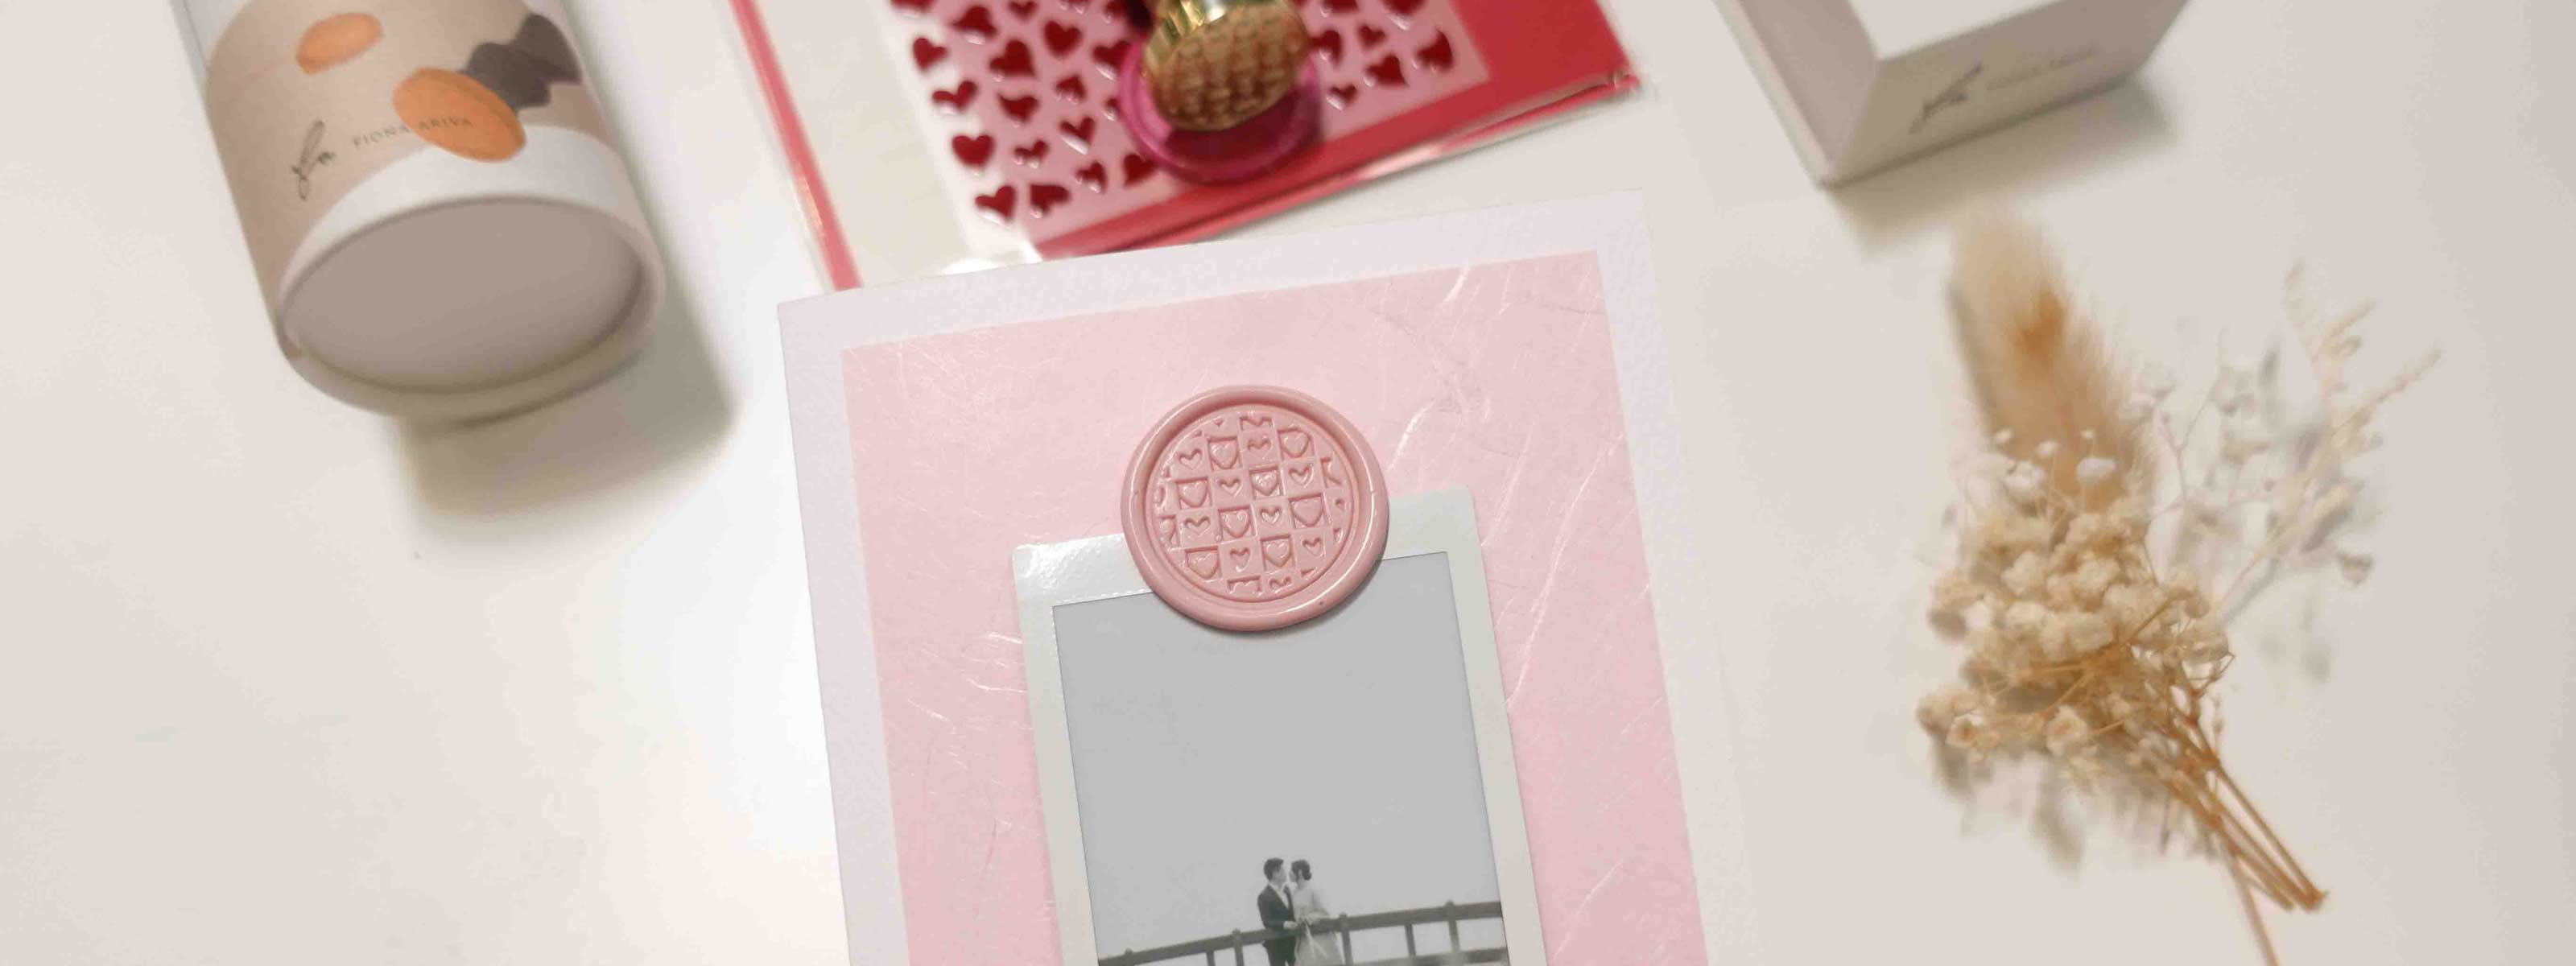 Ready Made Wax Seal Stamp - Happy Mother's Day Heart Shape Day Wax Seal Stamp